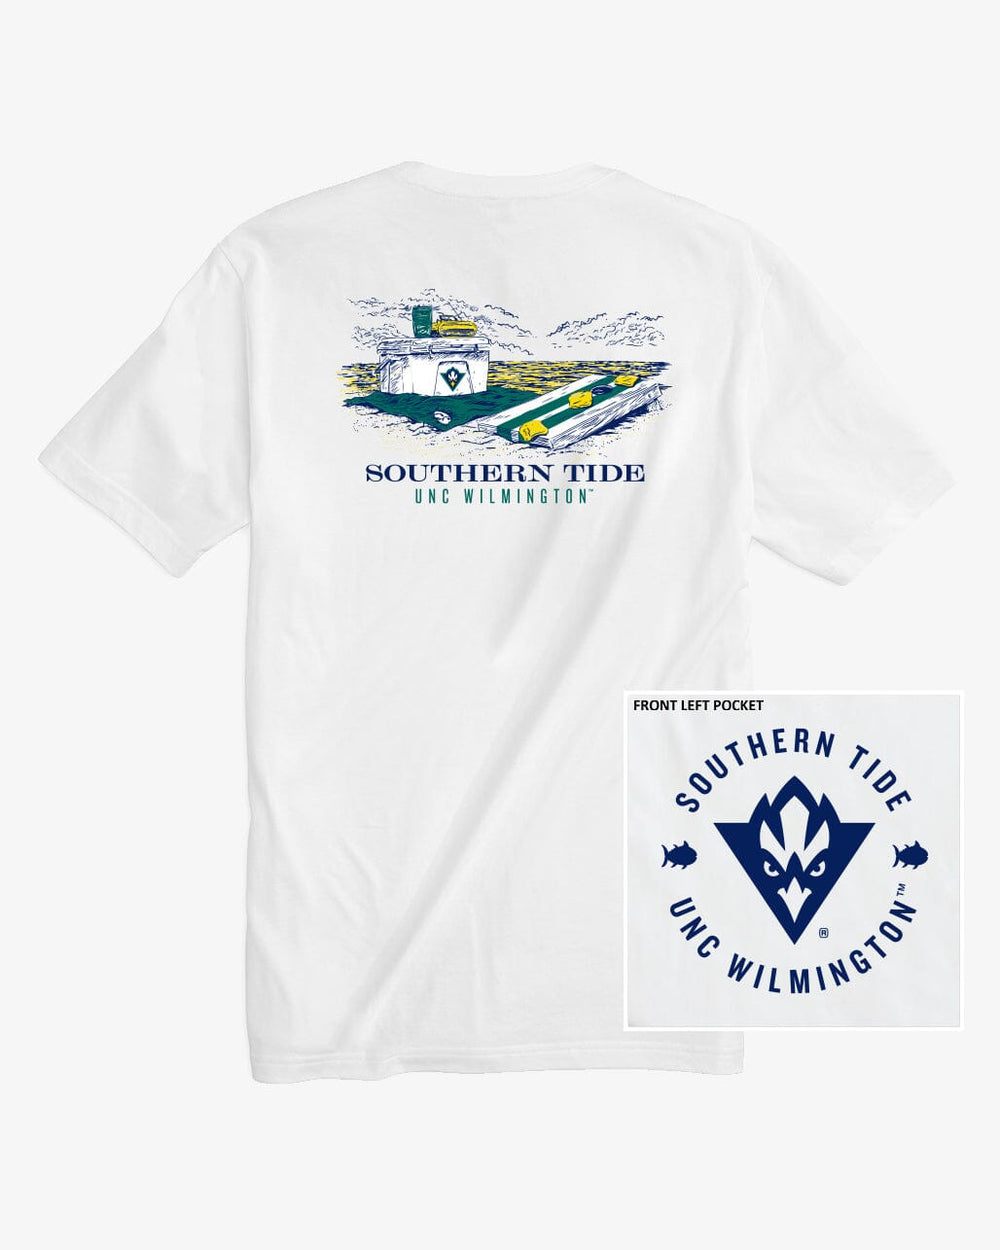 The front view of the North Carolina Wilmington Beach Cornhole T-Shirt by Southern Tide - Classic White